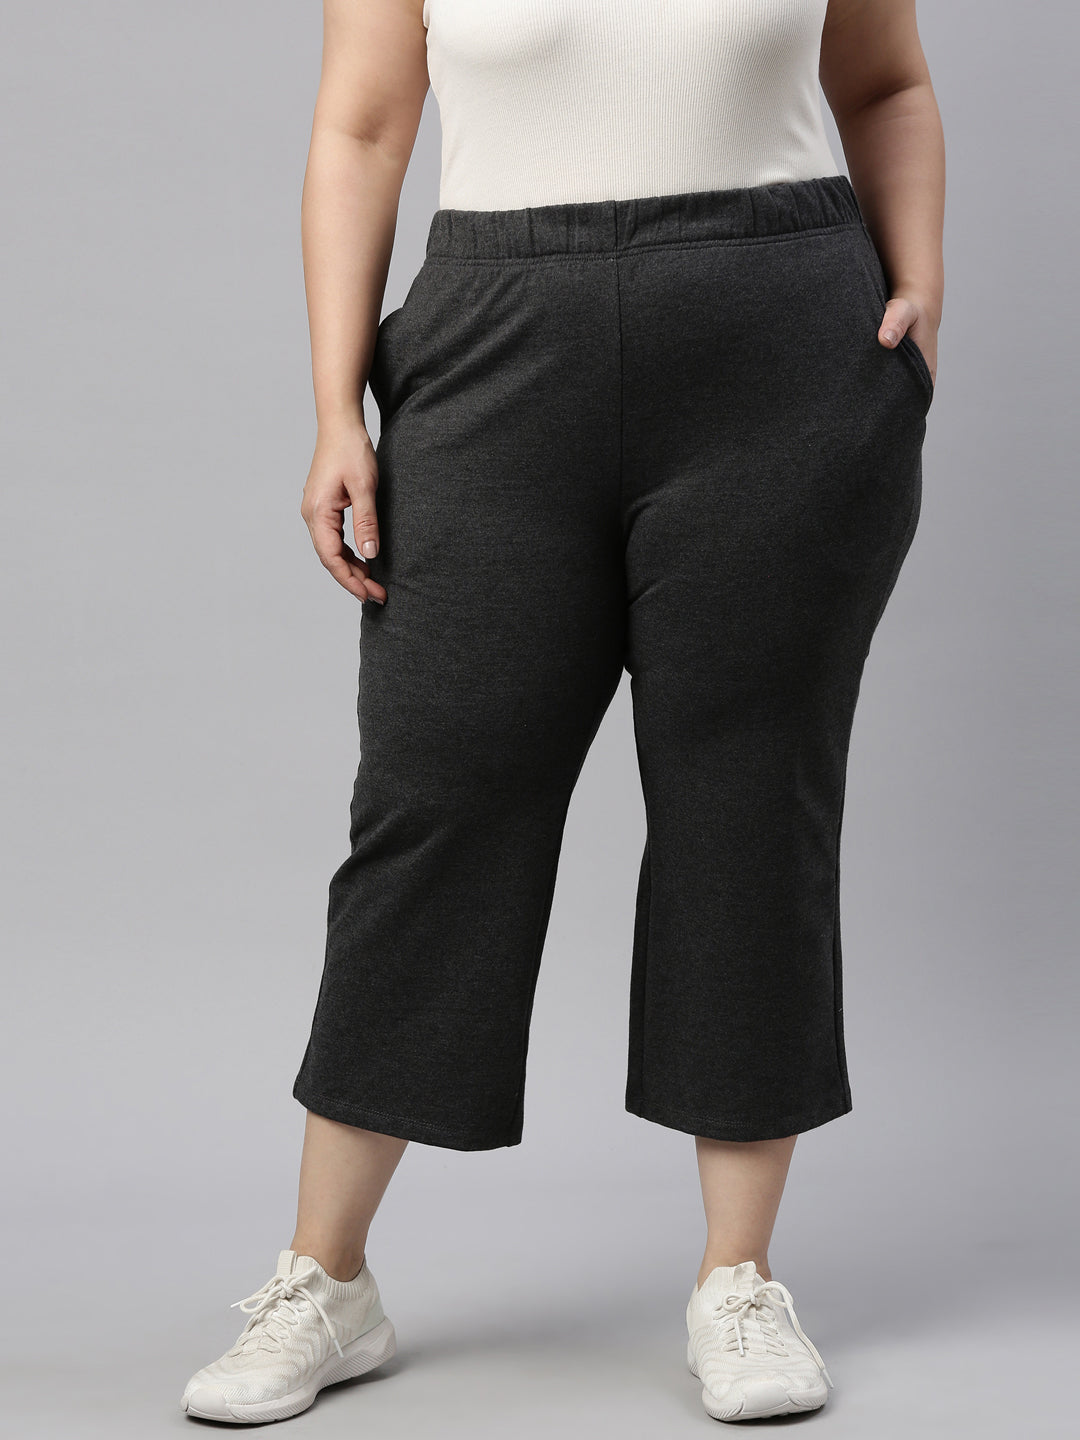 Plus Size Casual Pants - Shop Casual Bottom Wear For Ladies – The Pink Moon